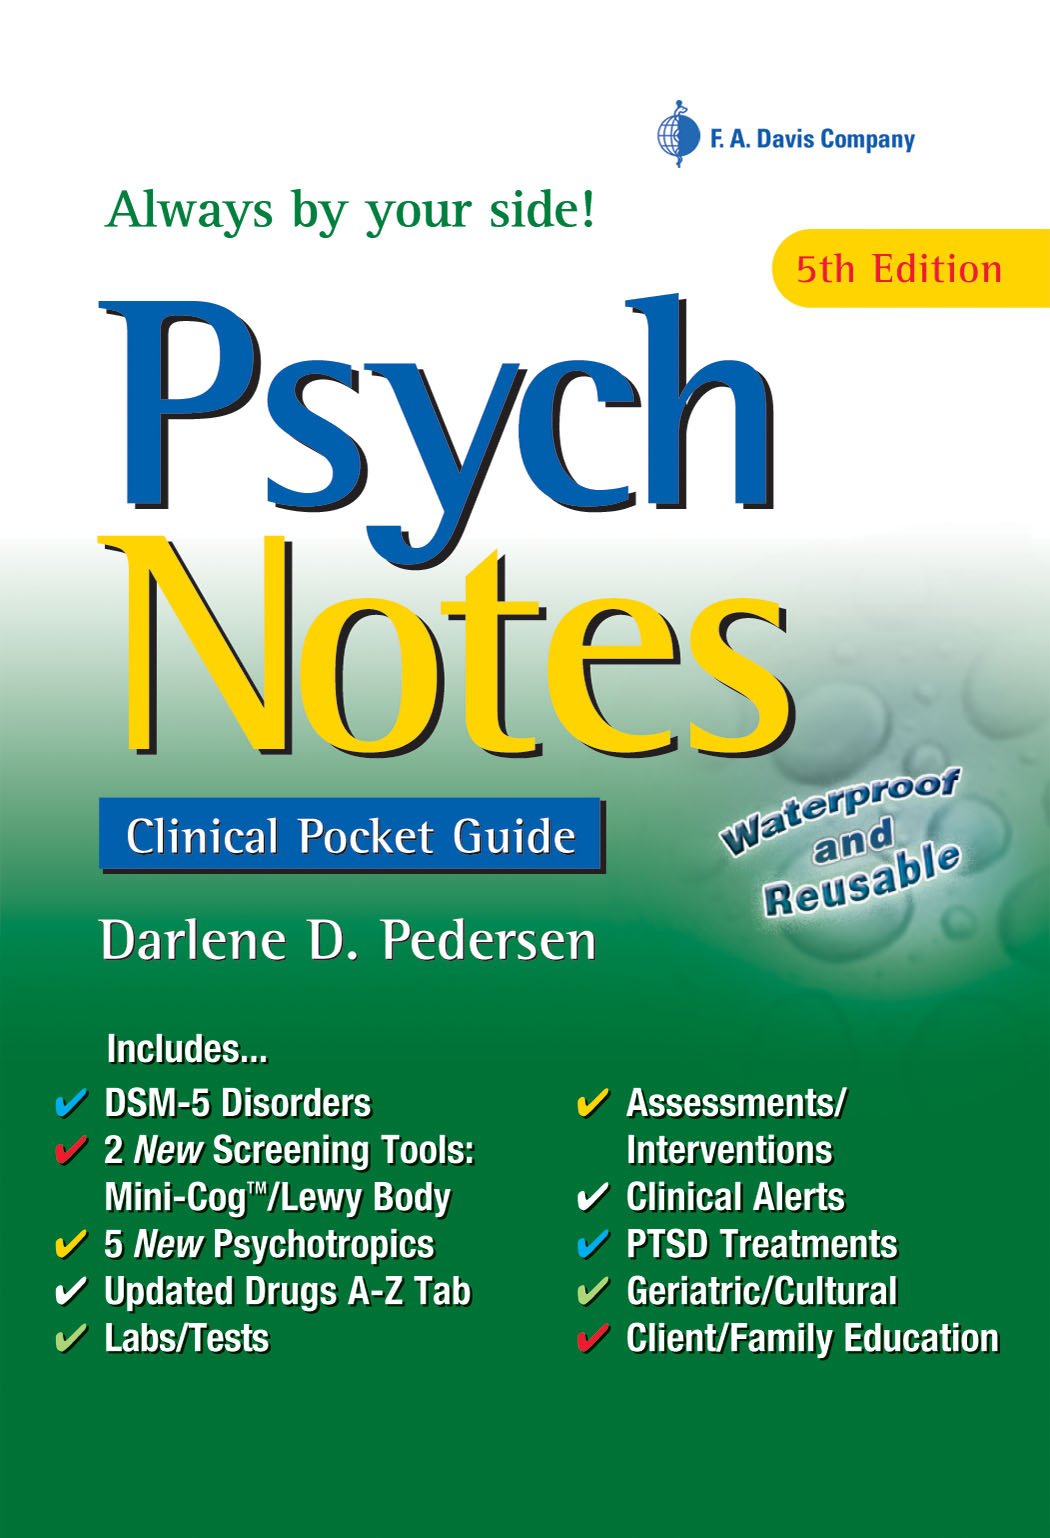 Book Cover PsychNotes, Clinical Pocket Guide, 5th edition